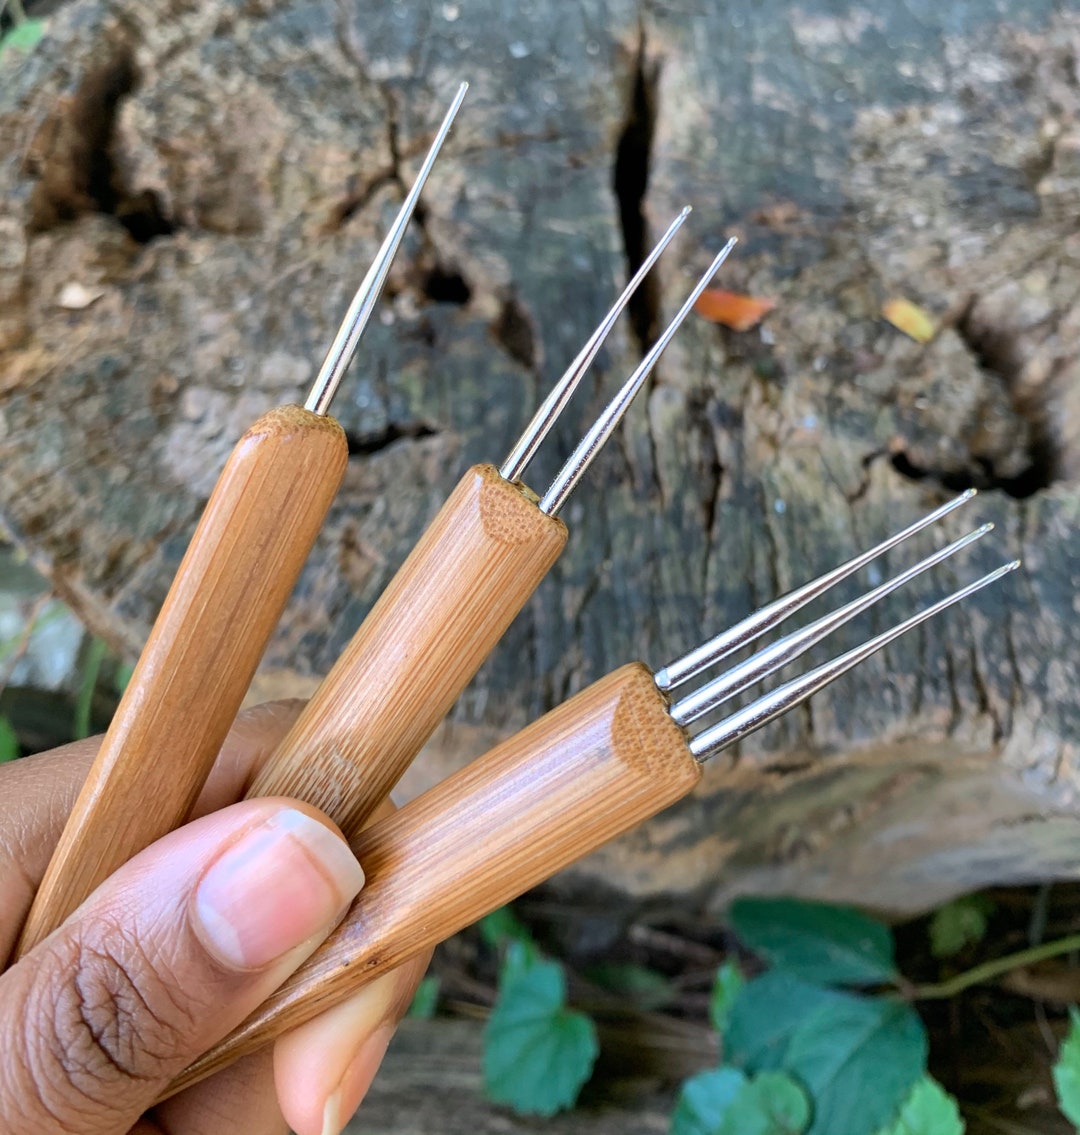 how to use loc needle for instant locking｜TikTok Search